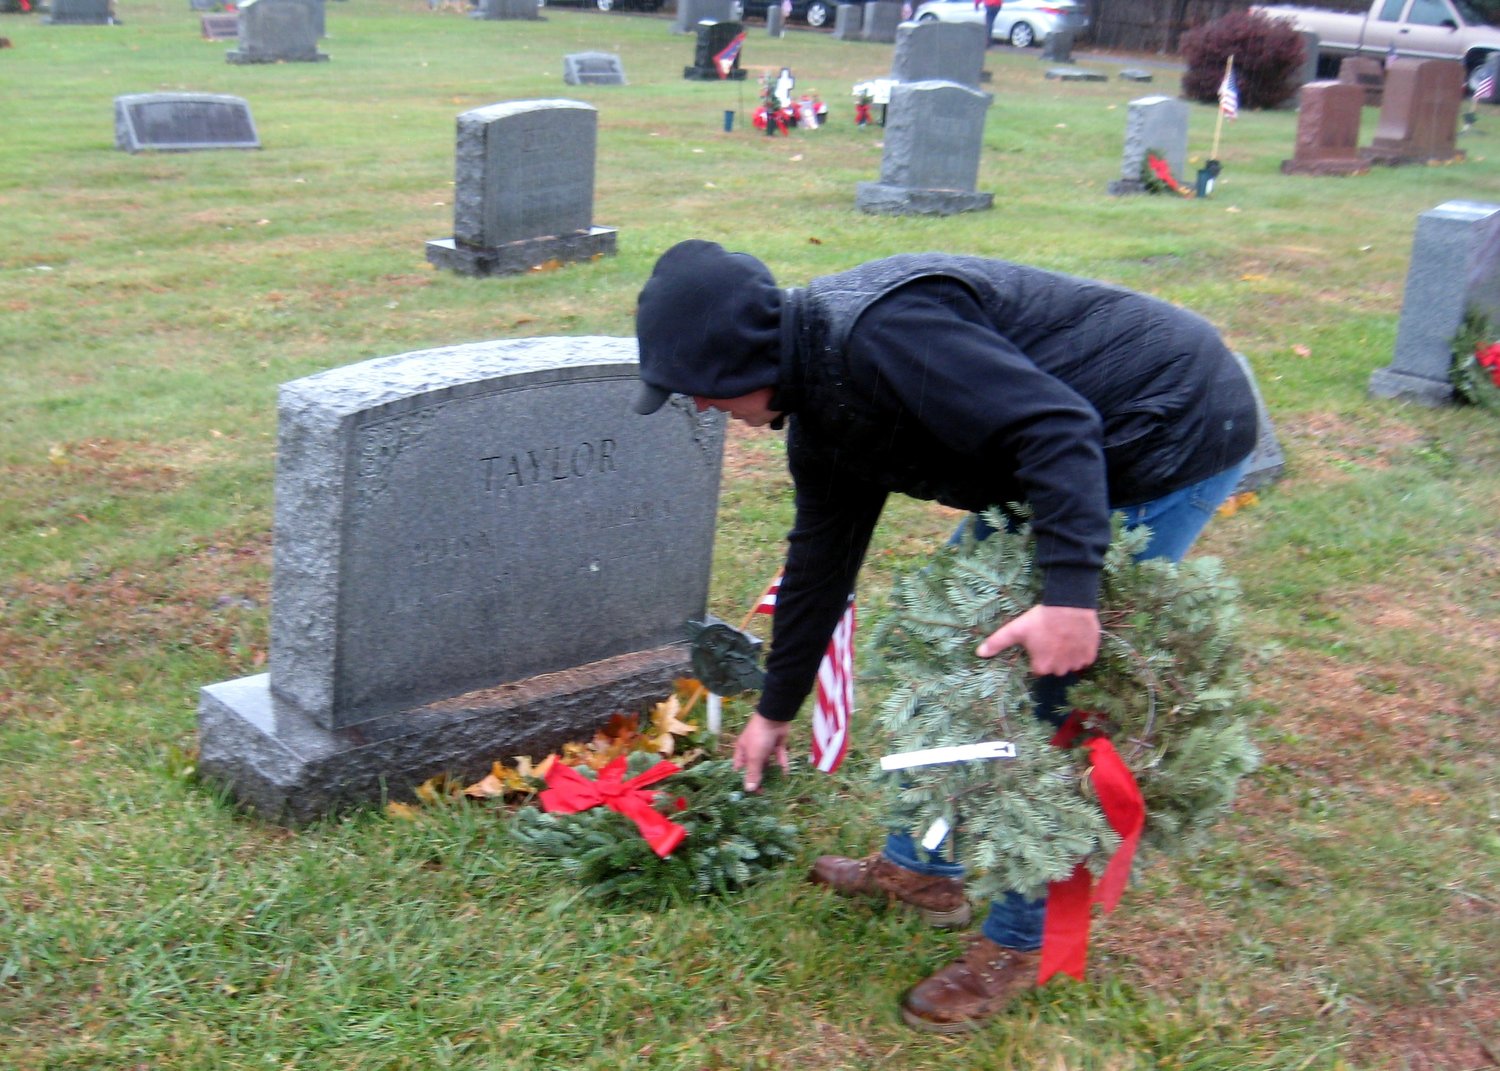 Ron Reilly lays a wreath on a grave during the Northampton Township Veterans Advisory Commission’s 2022 Hometown Heroes Wreath Laying Ceremony.